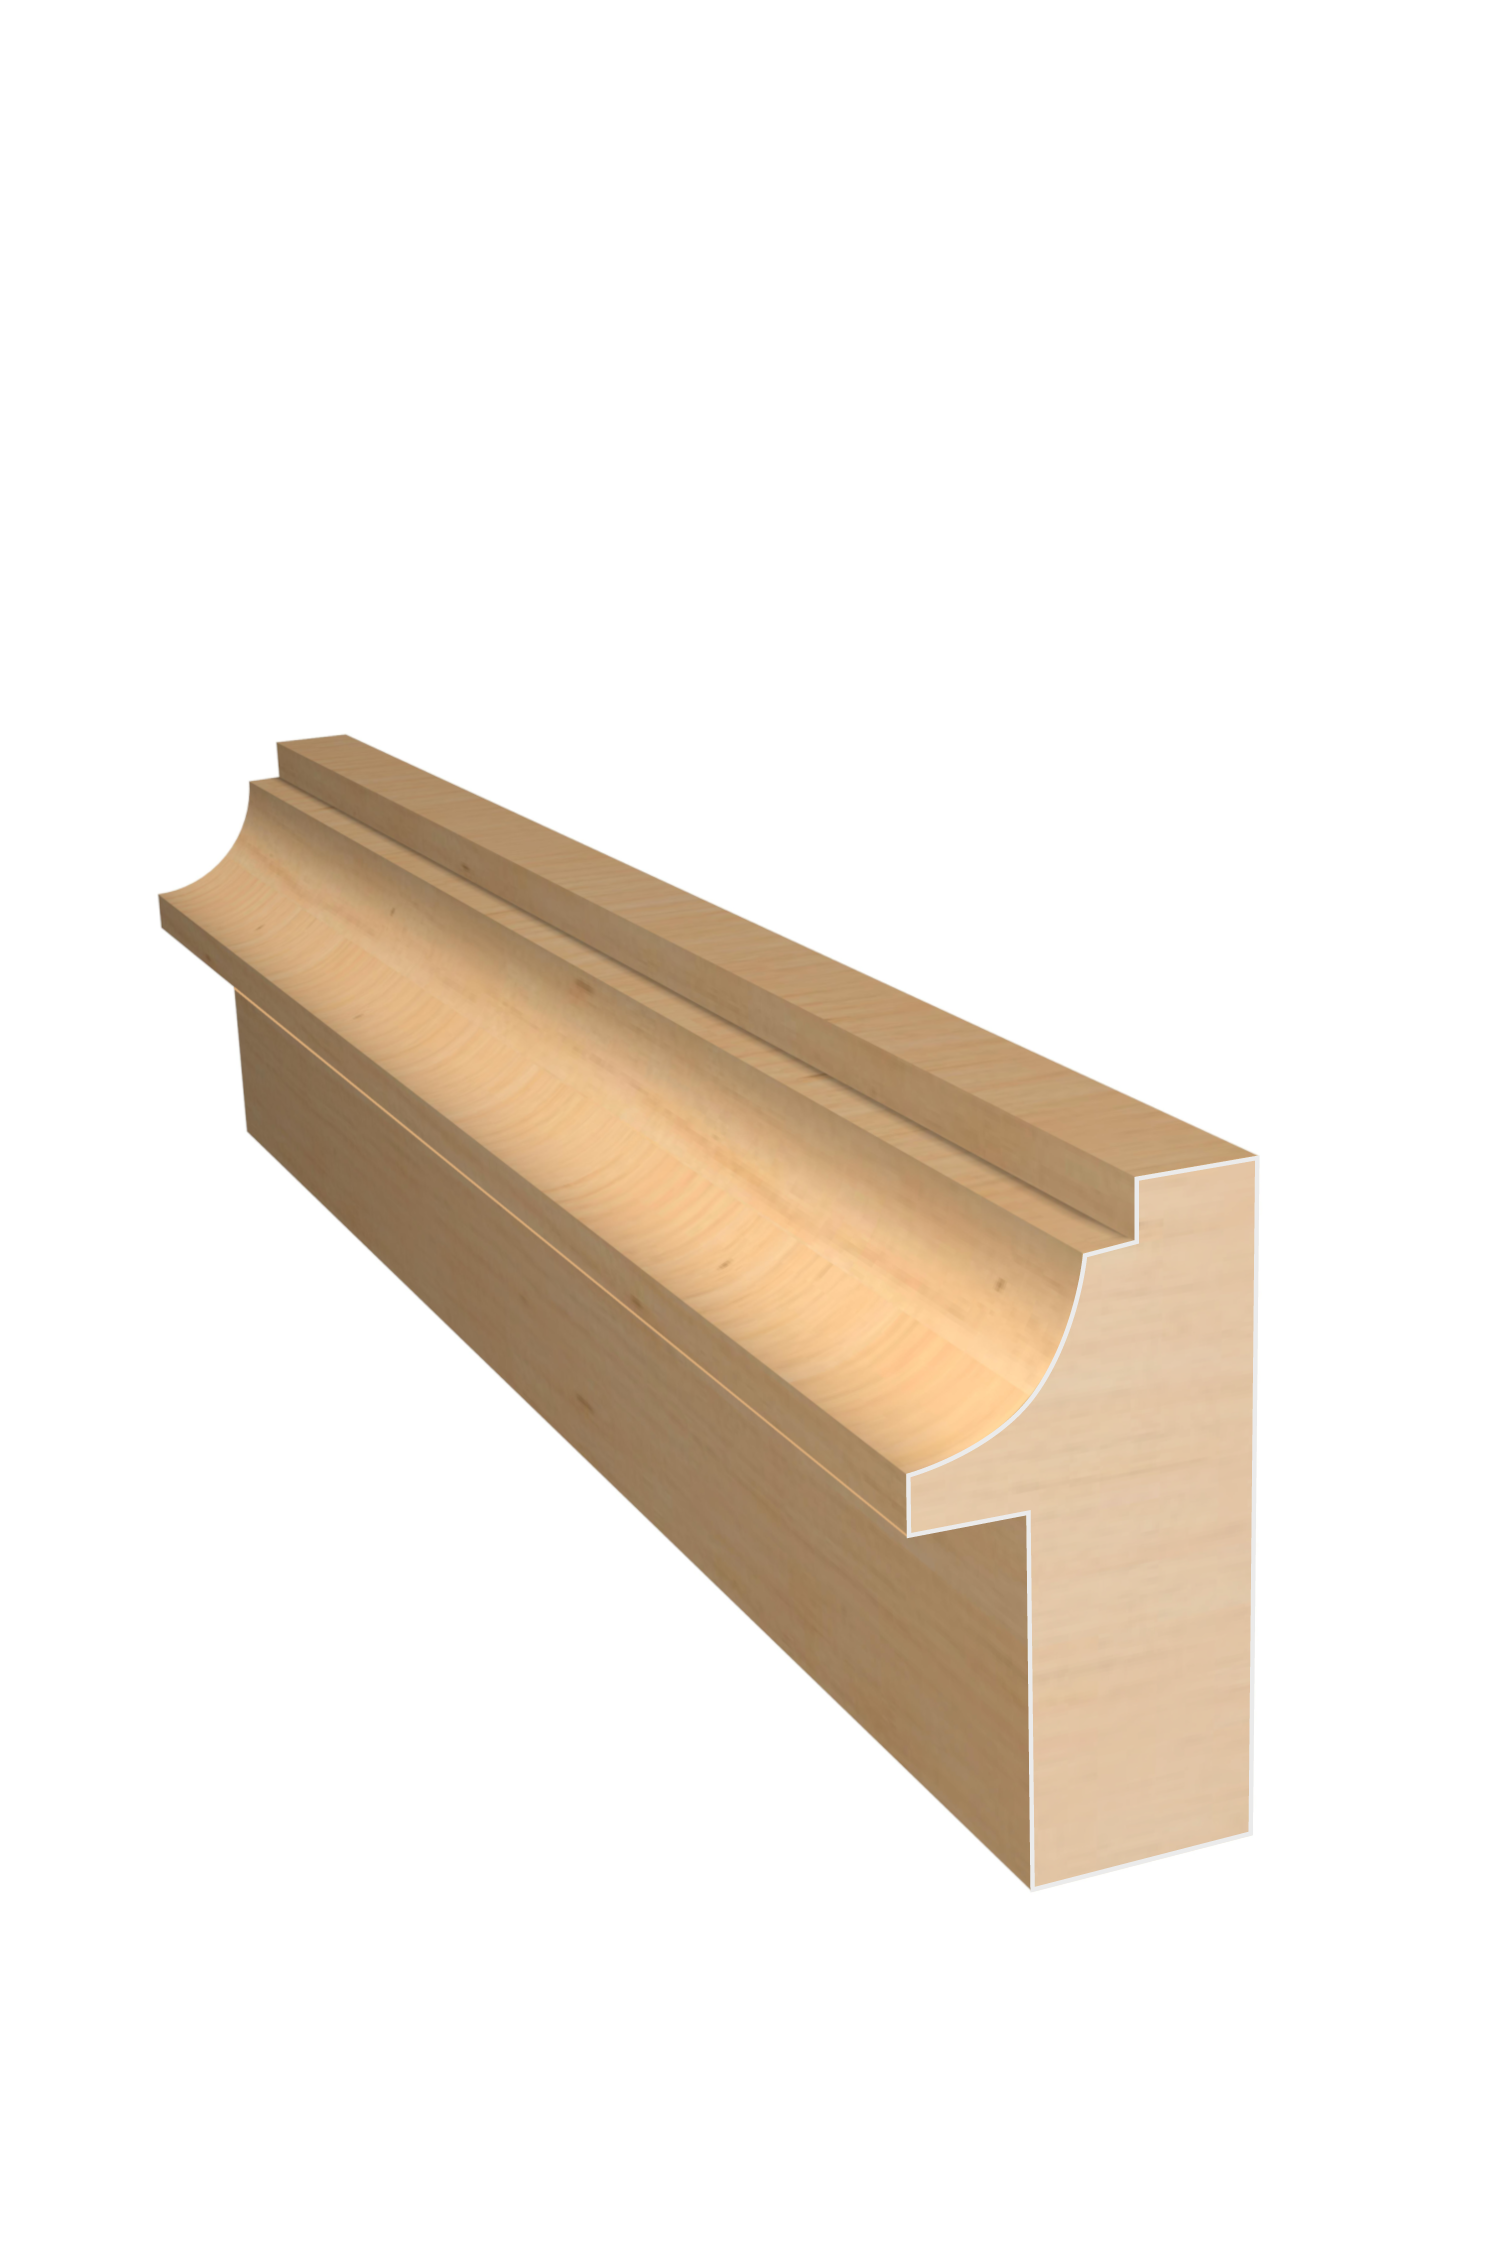 Three dimensional rendering of custom backband wood molding BBPL19 made by Public Lumber Company in Detroit.